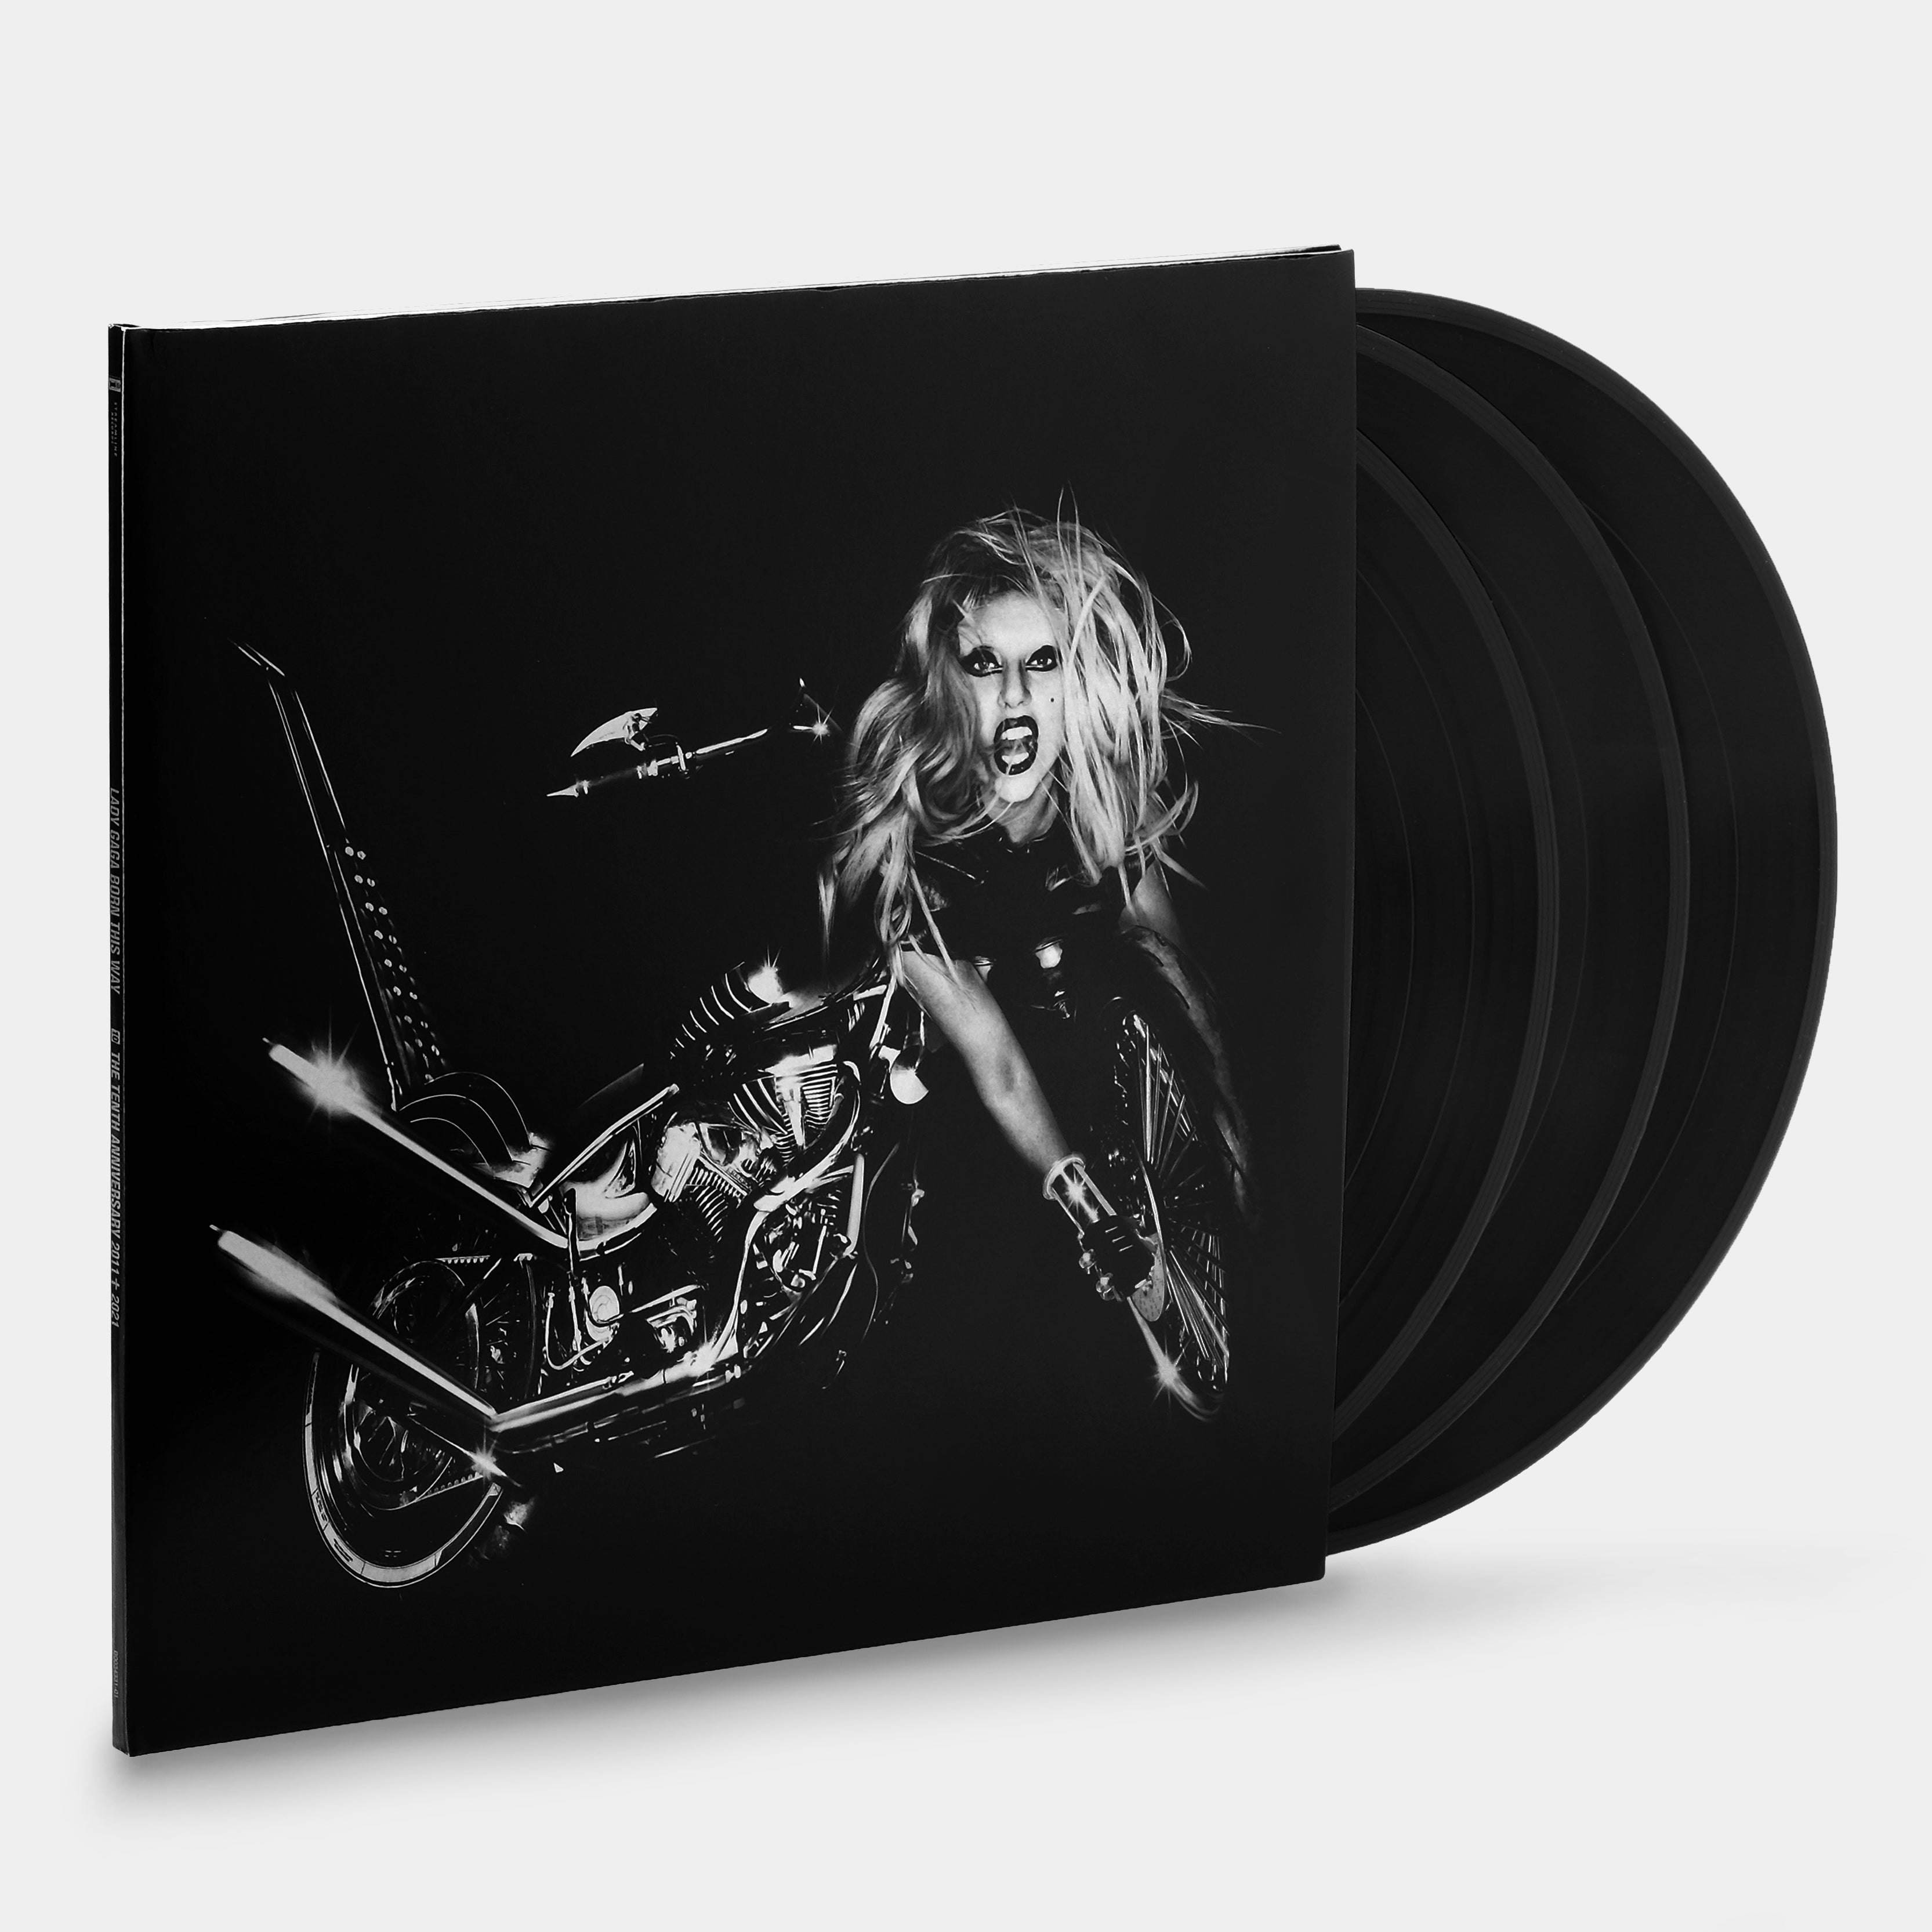 Lady Gaga - Born This Way (The Tenth Anniversary) / Born This Way Reimagined 3xLP Vinyl Record